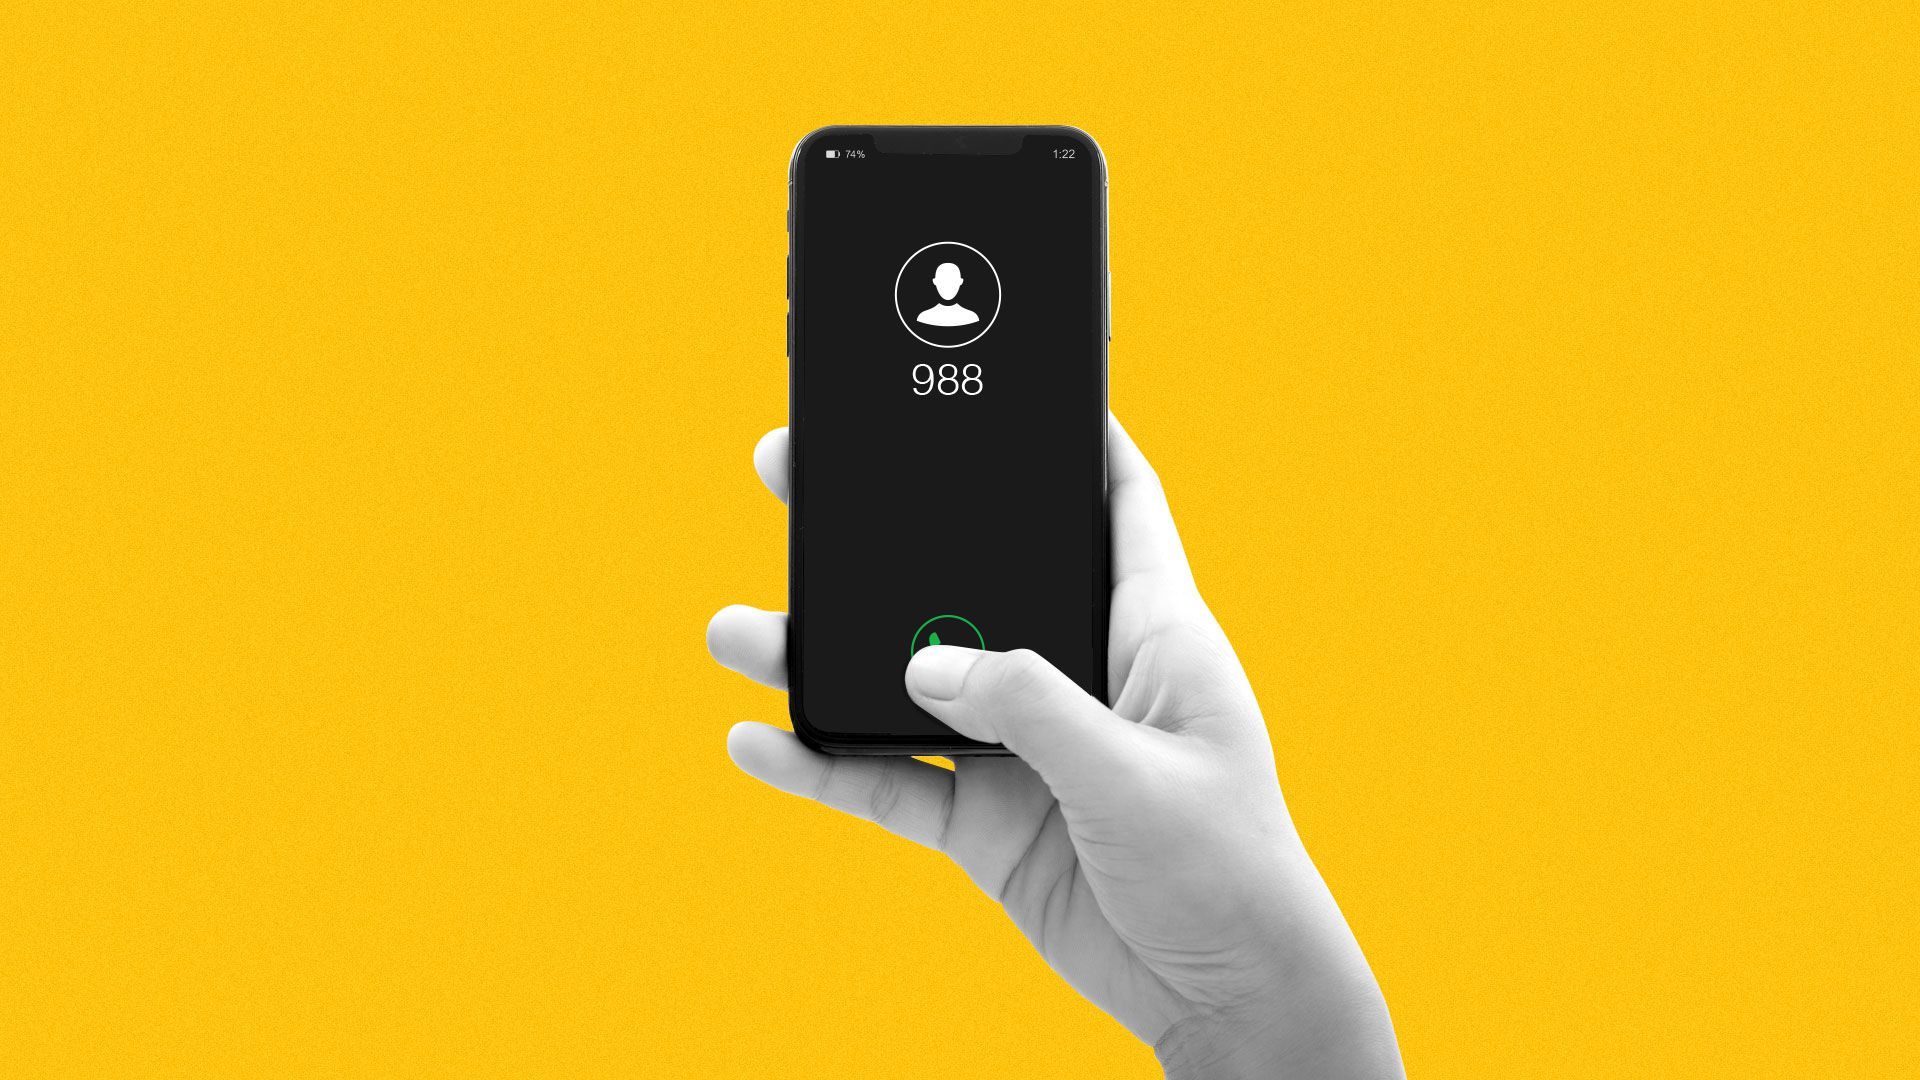 Illustration of Illustration of person dialing 988 on smartphone